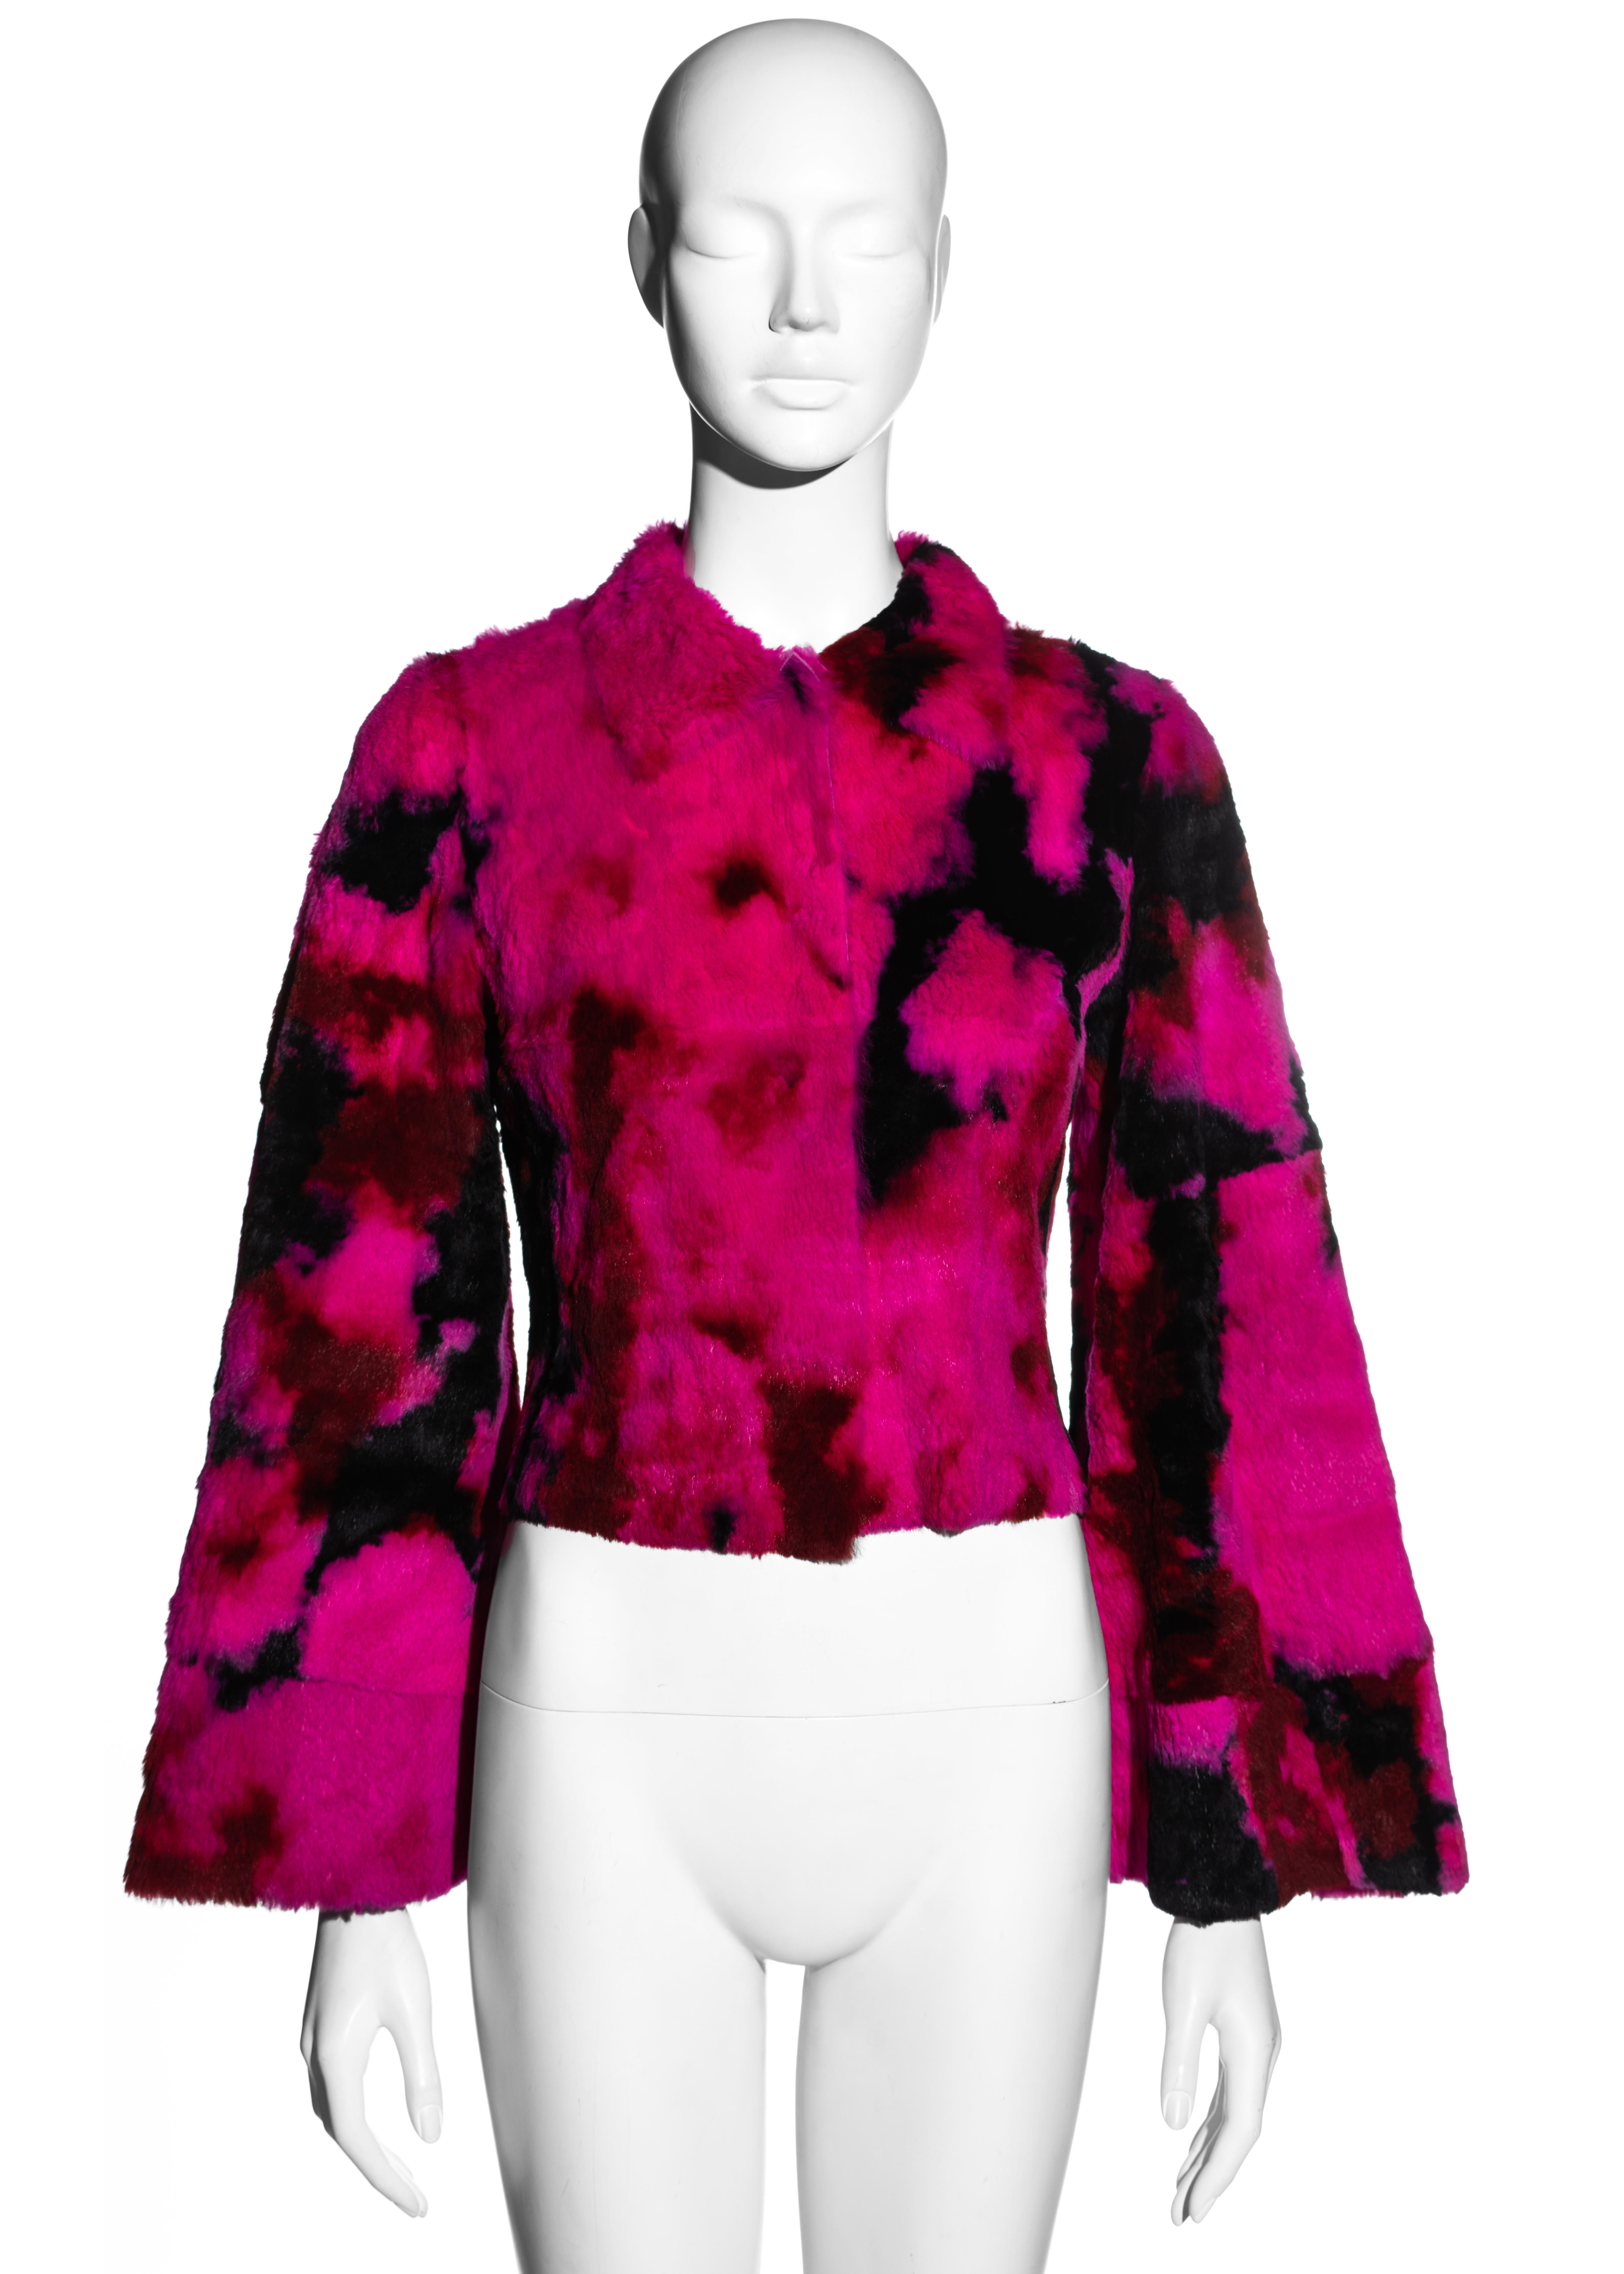 ▪ Dolce & Gabbana pink and black tie-dyed jacket  
▪ Sheared rabbit fur  
▪ Wide long sleeves  
▪ Snap button closures  
▪ Size Small 
▪ Fall-Winter 1999